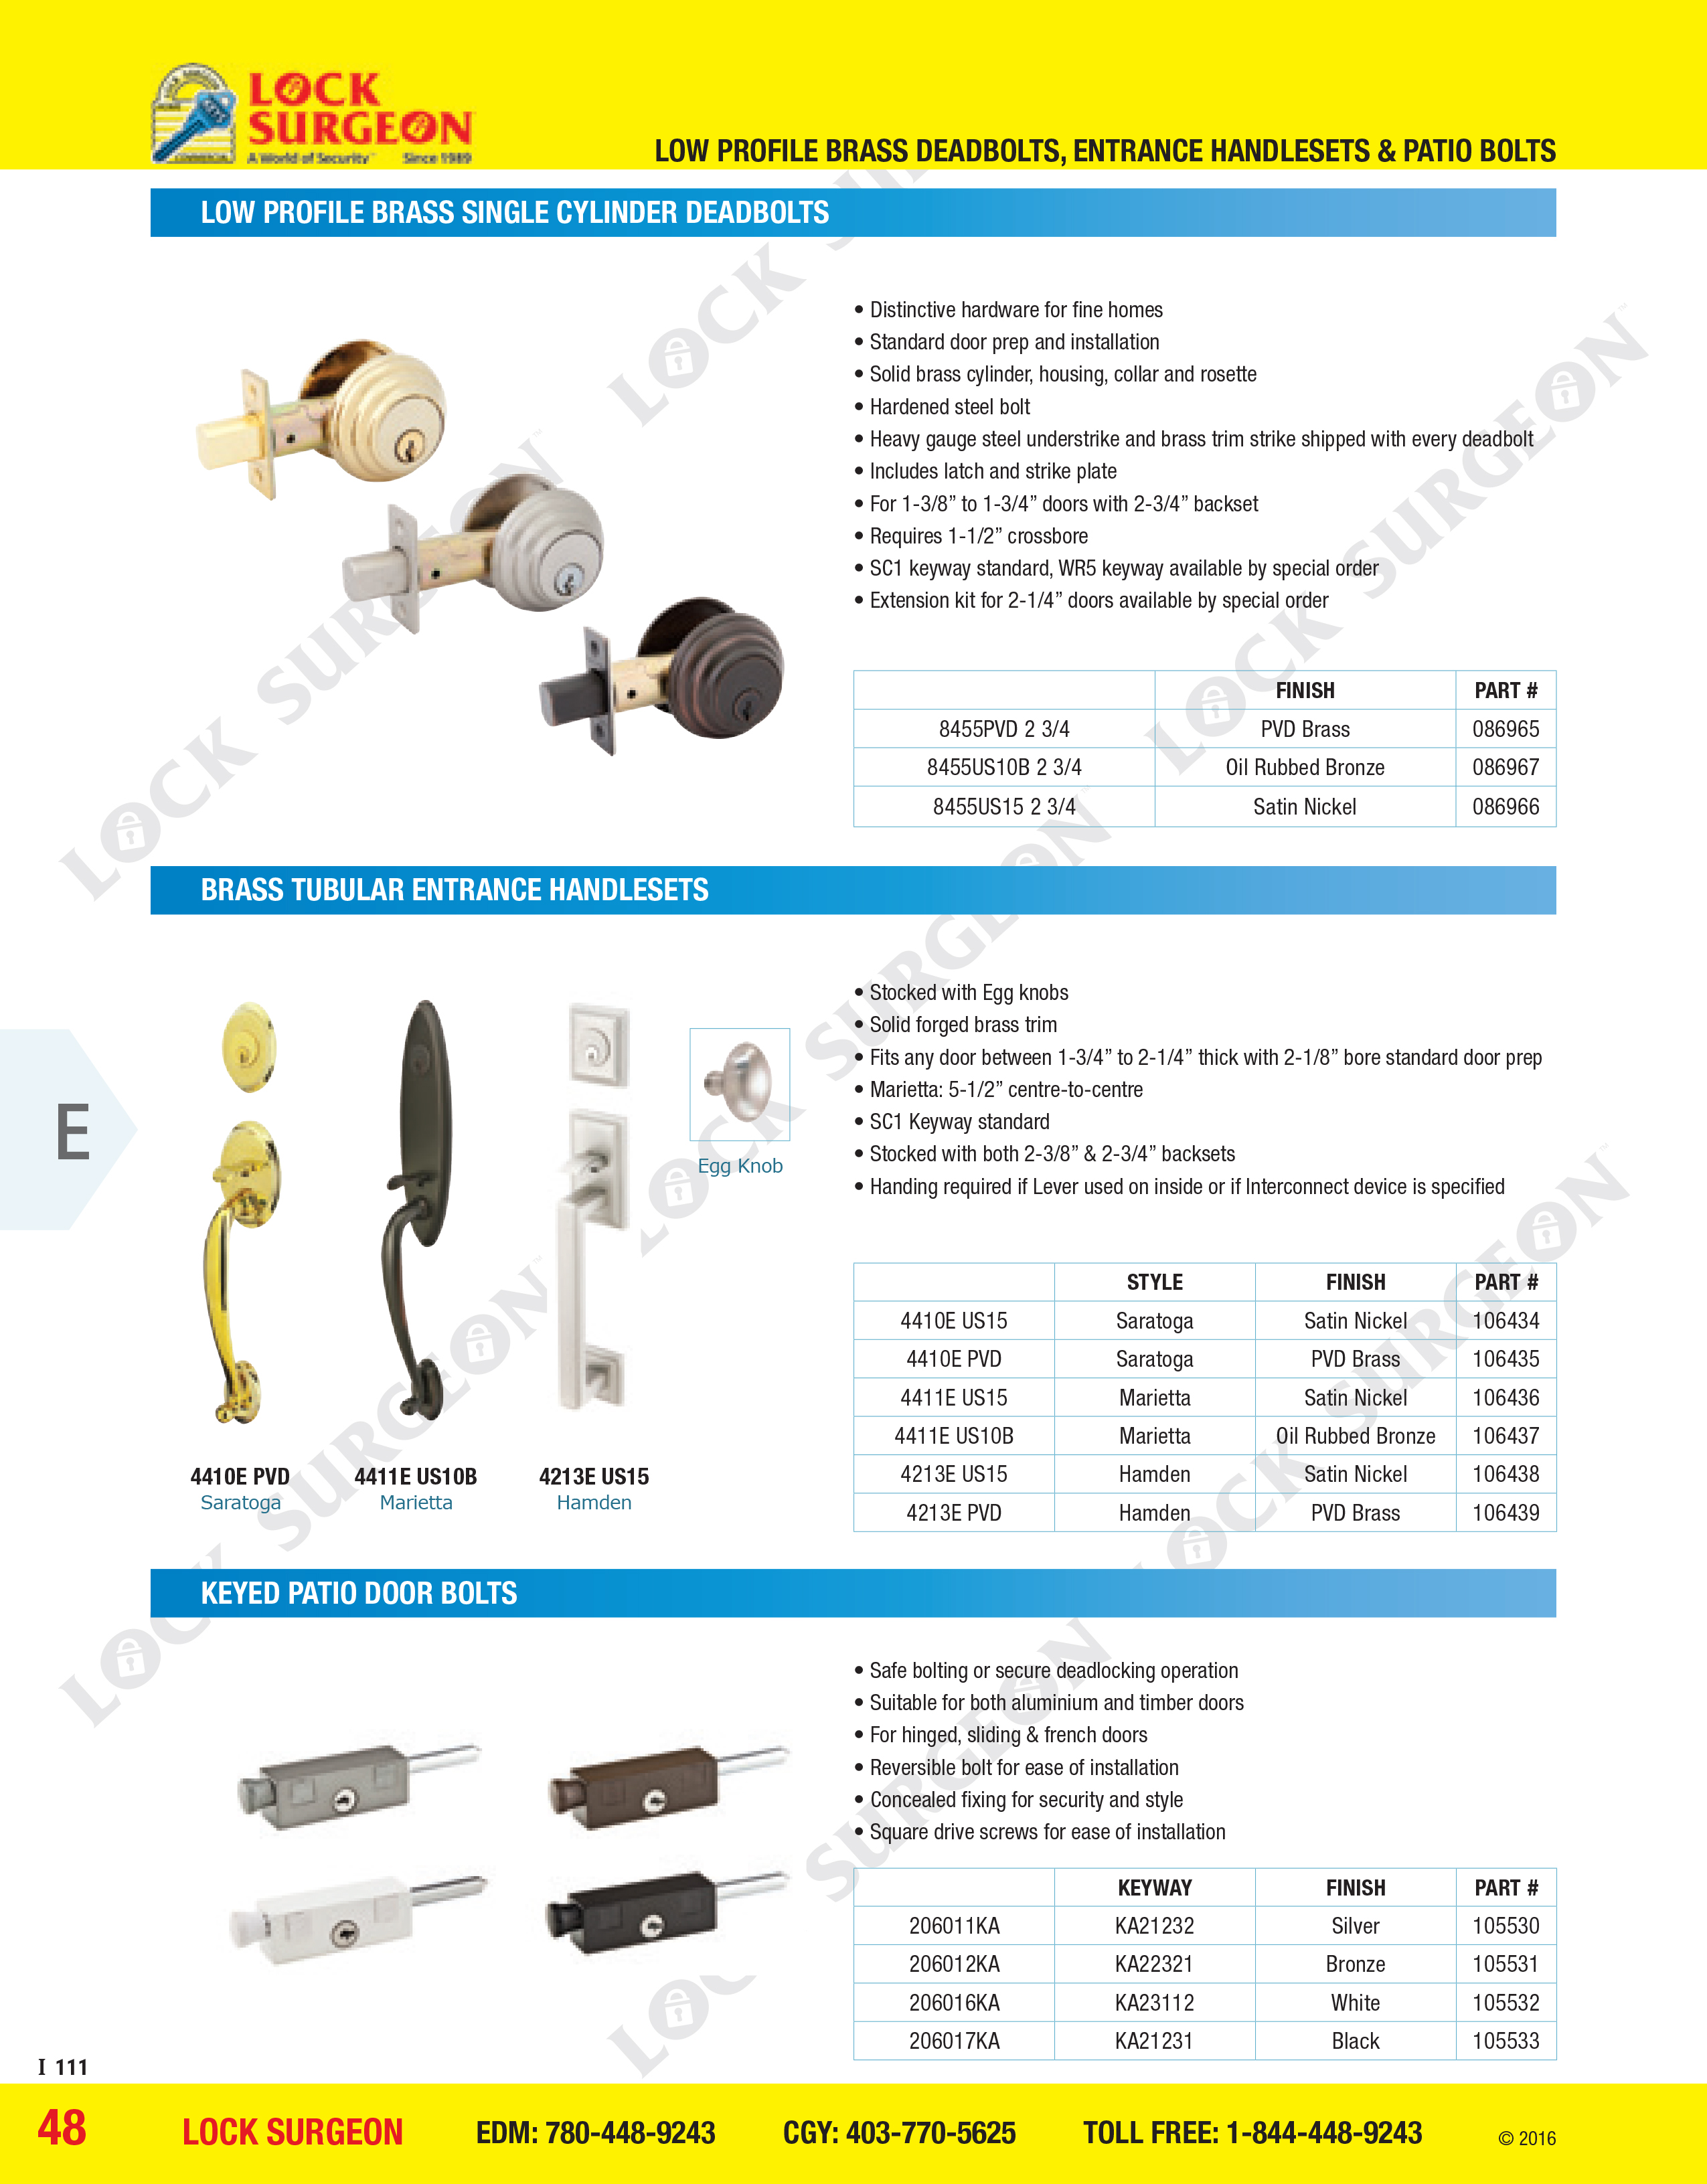 made for style and function schlage deadbolts and handles. Secondary locking Patio pins to lock down patio doors